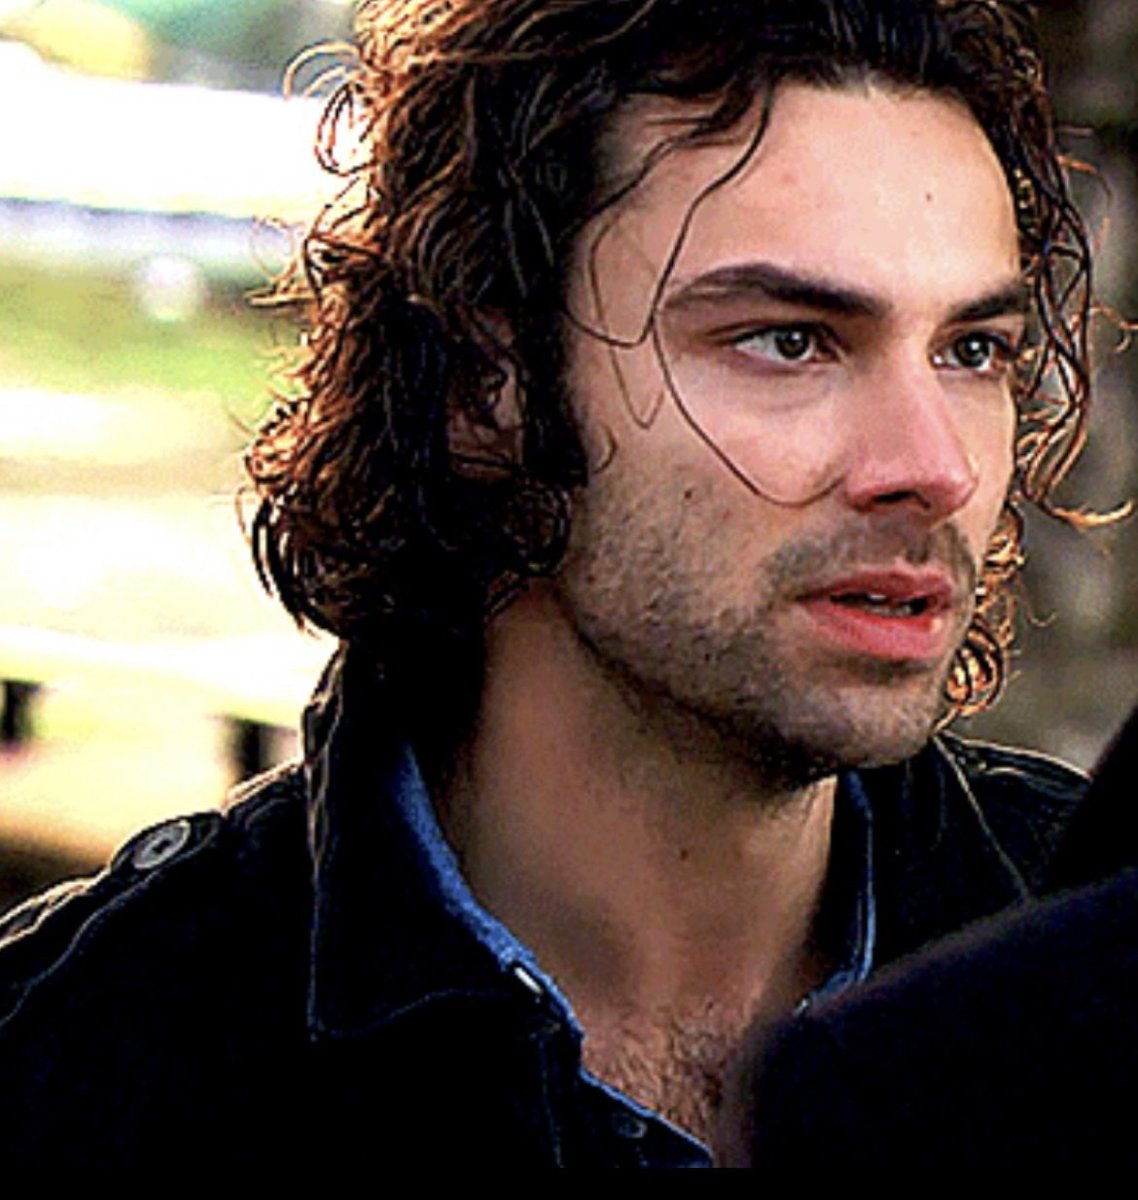 Have an amazing #MitchellMonday and a lovely start to May💐🌷#AidanTurner #AidanCrew #BeingHumanUK (Photo credit to TwelvePercent)